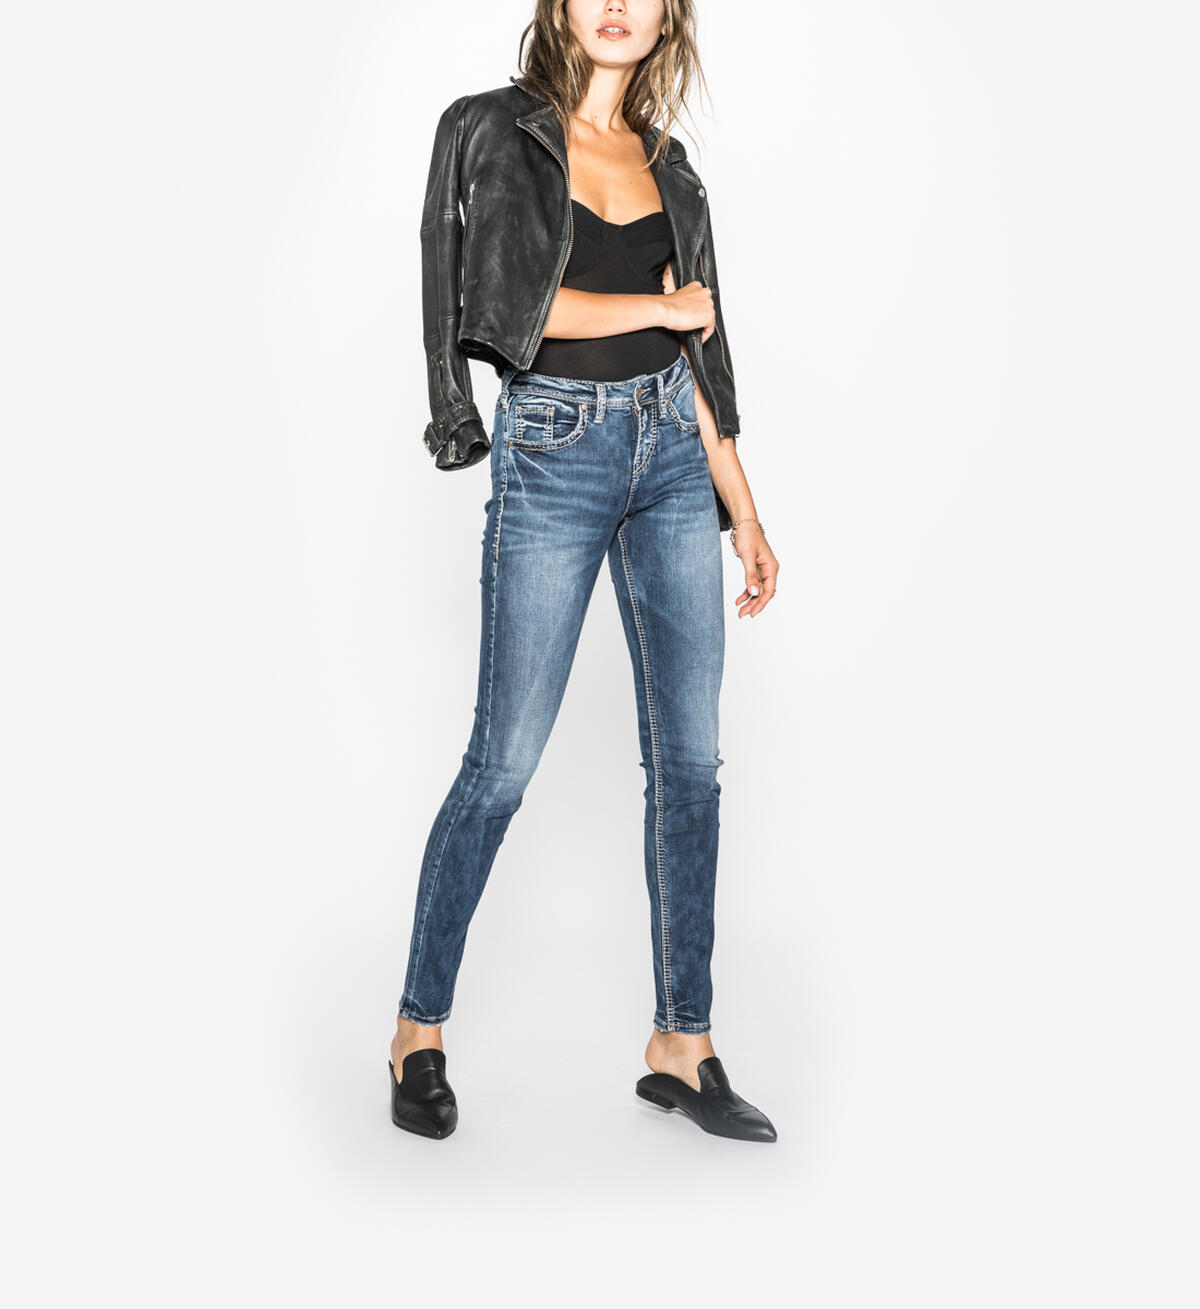 Avery High-Rise Skinny Jeans, , hi-res image number 0